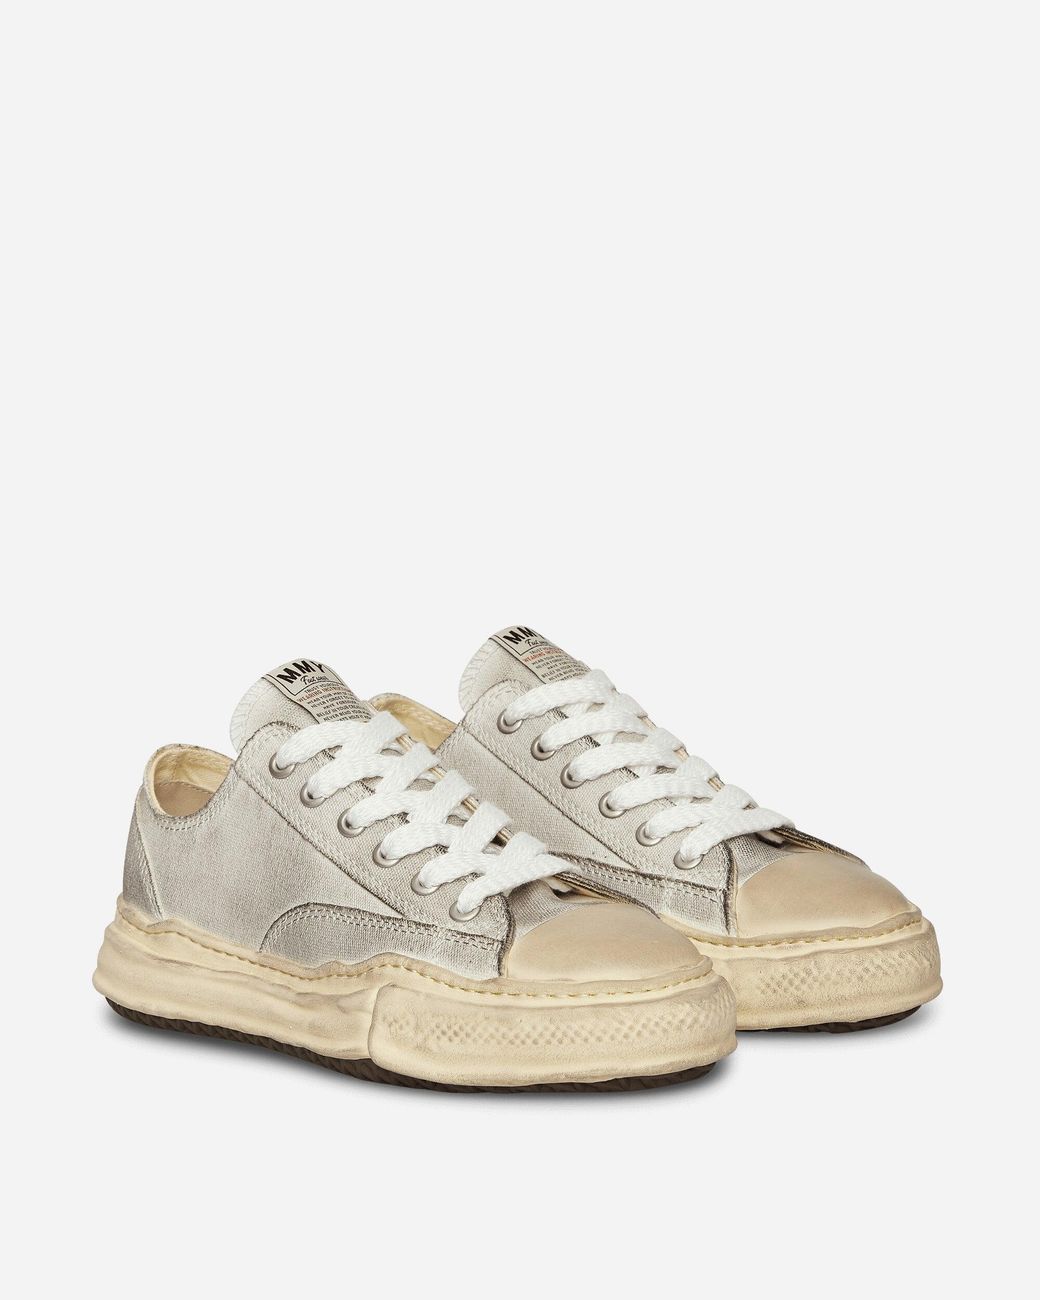 Maison Mihara Yasuhiro Peterson Og Sole Dr Canvas Low Sneakers in